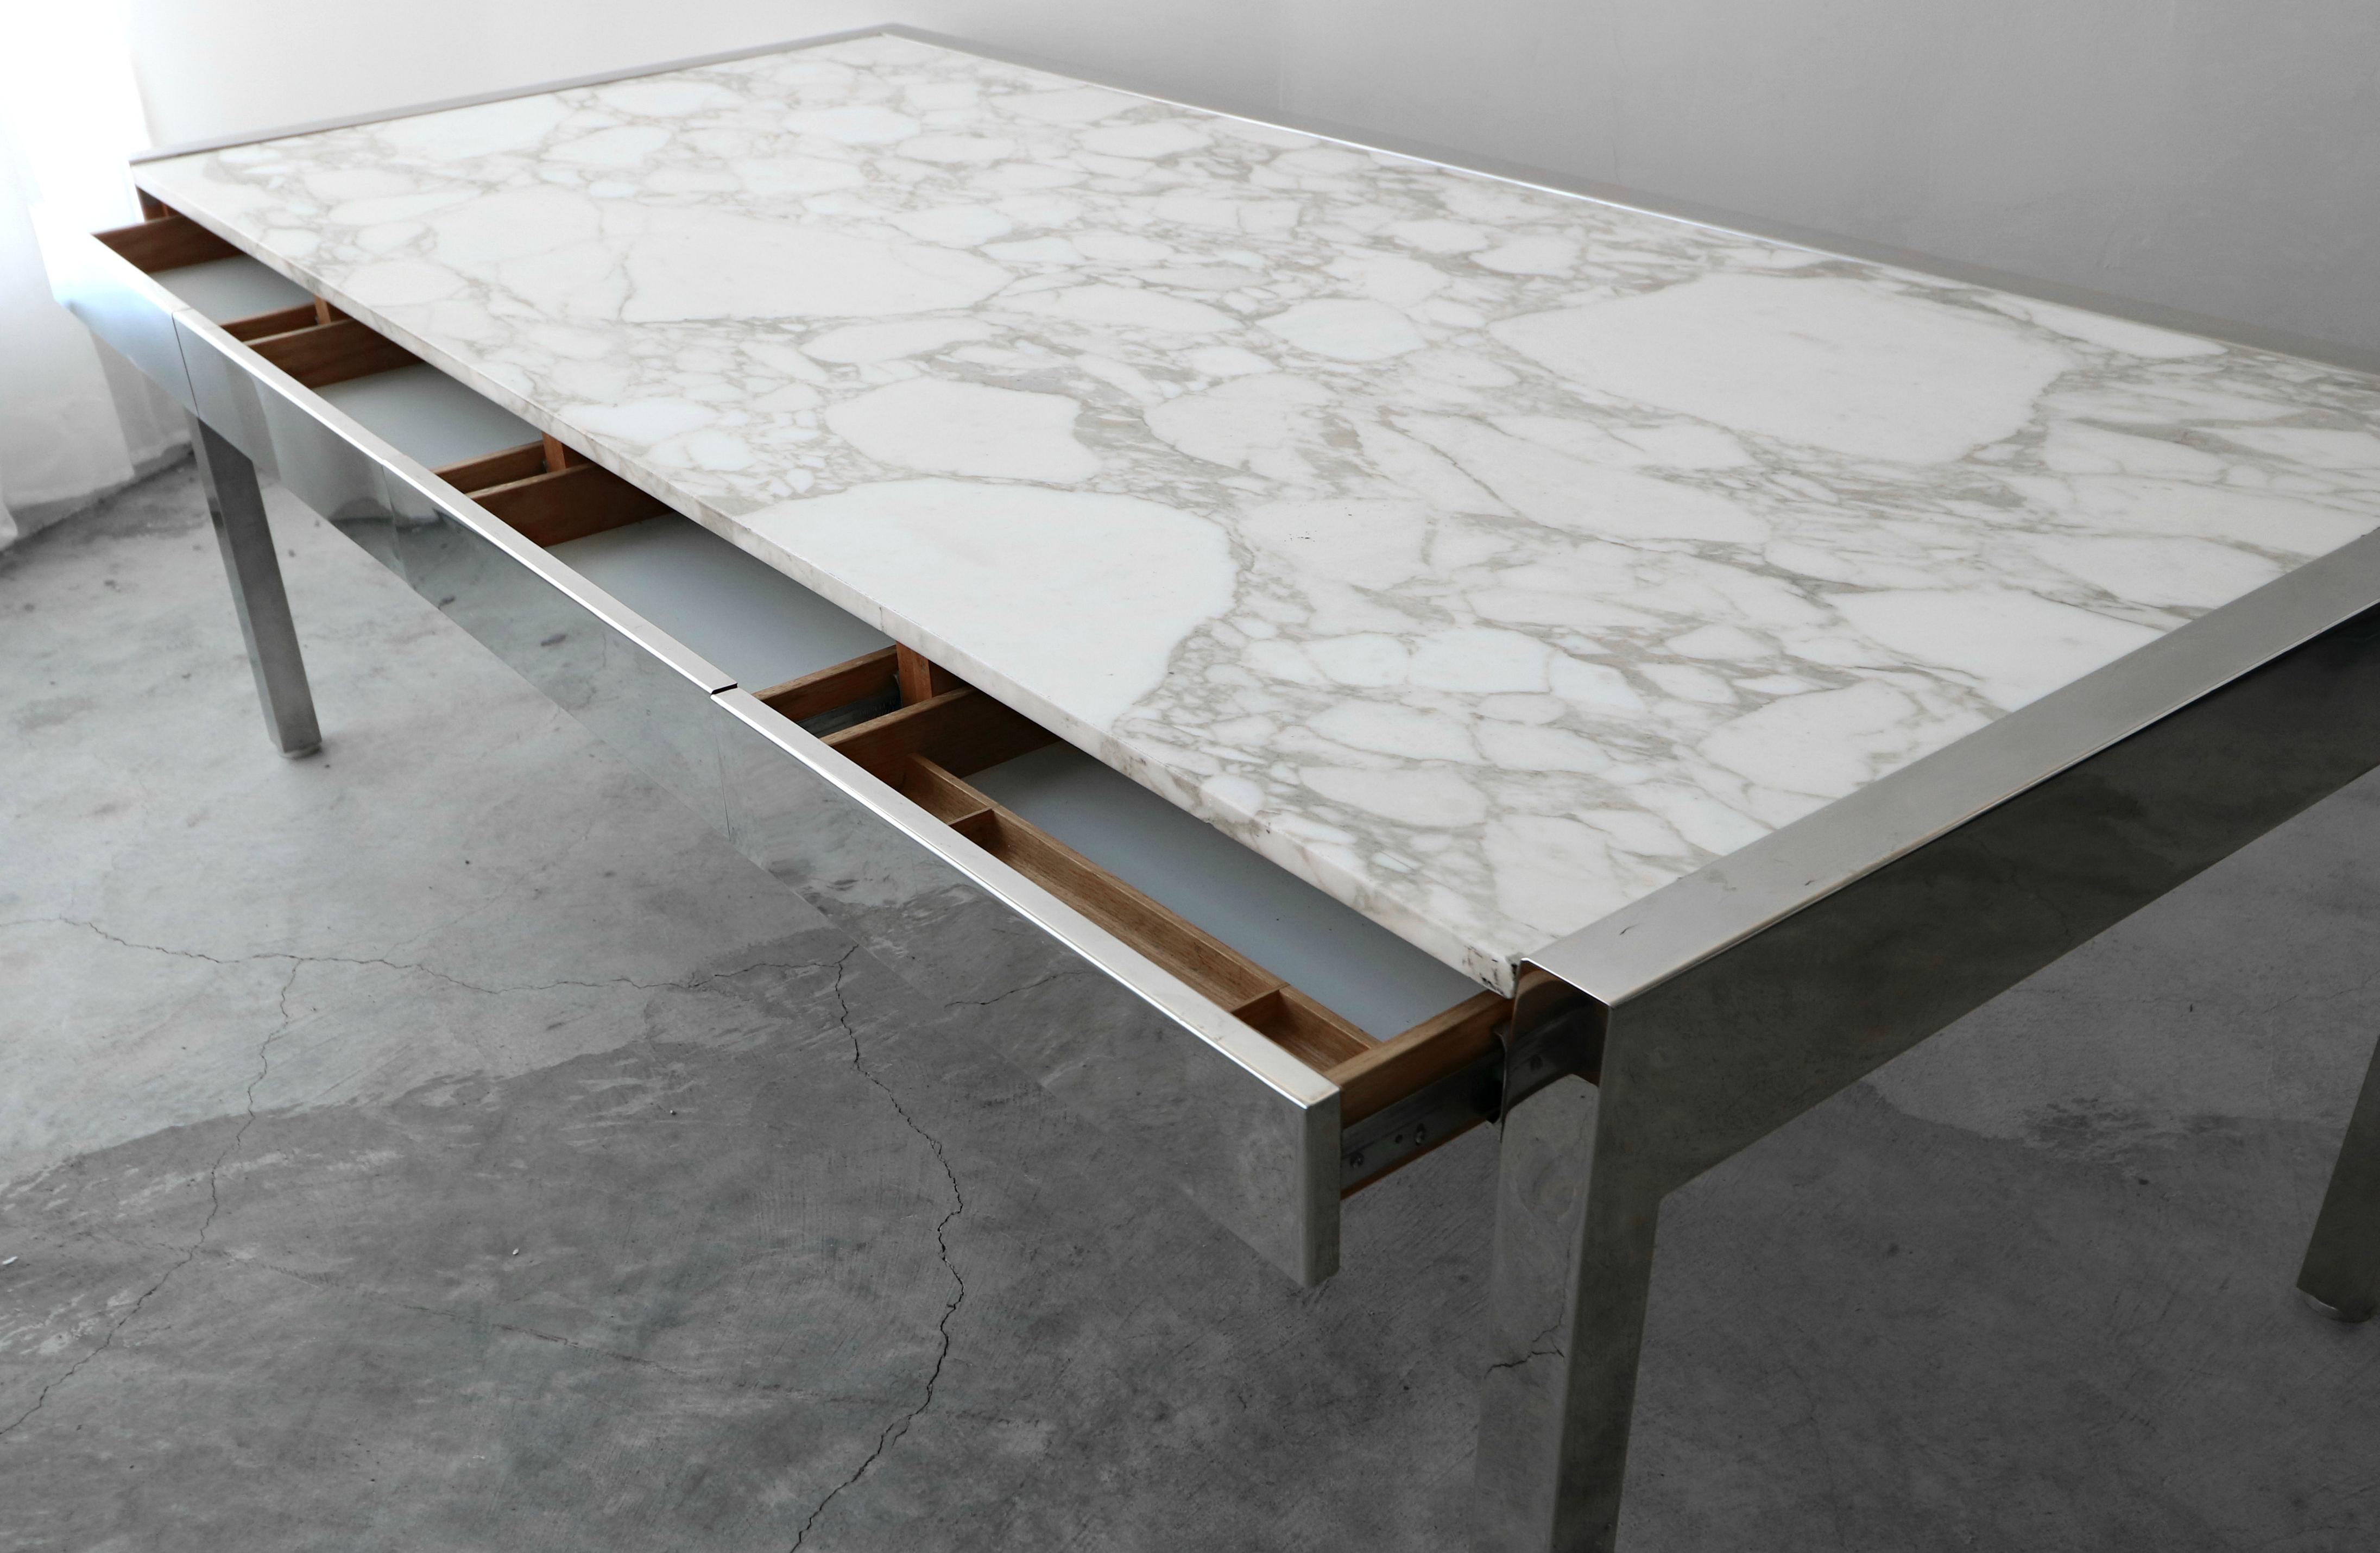 20th Century Monumental Marble and Stainless Steel Executive Desk by Leon Rosen for Pace